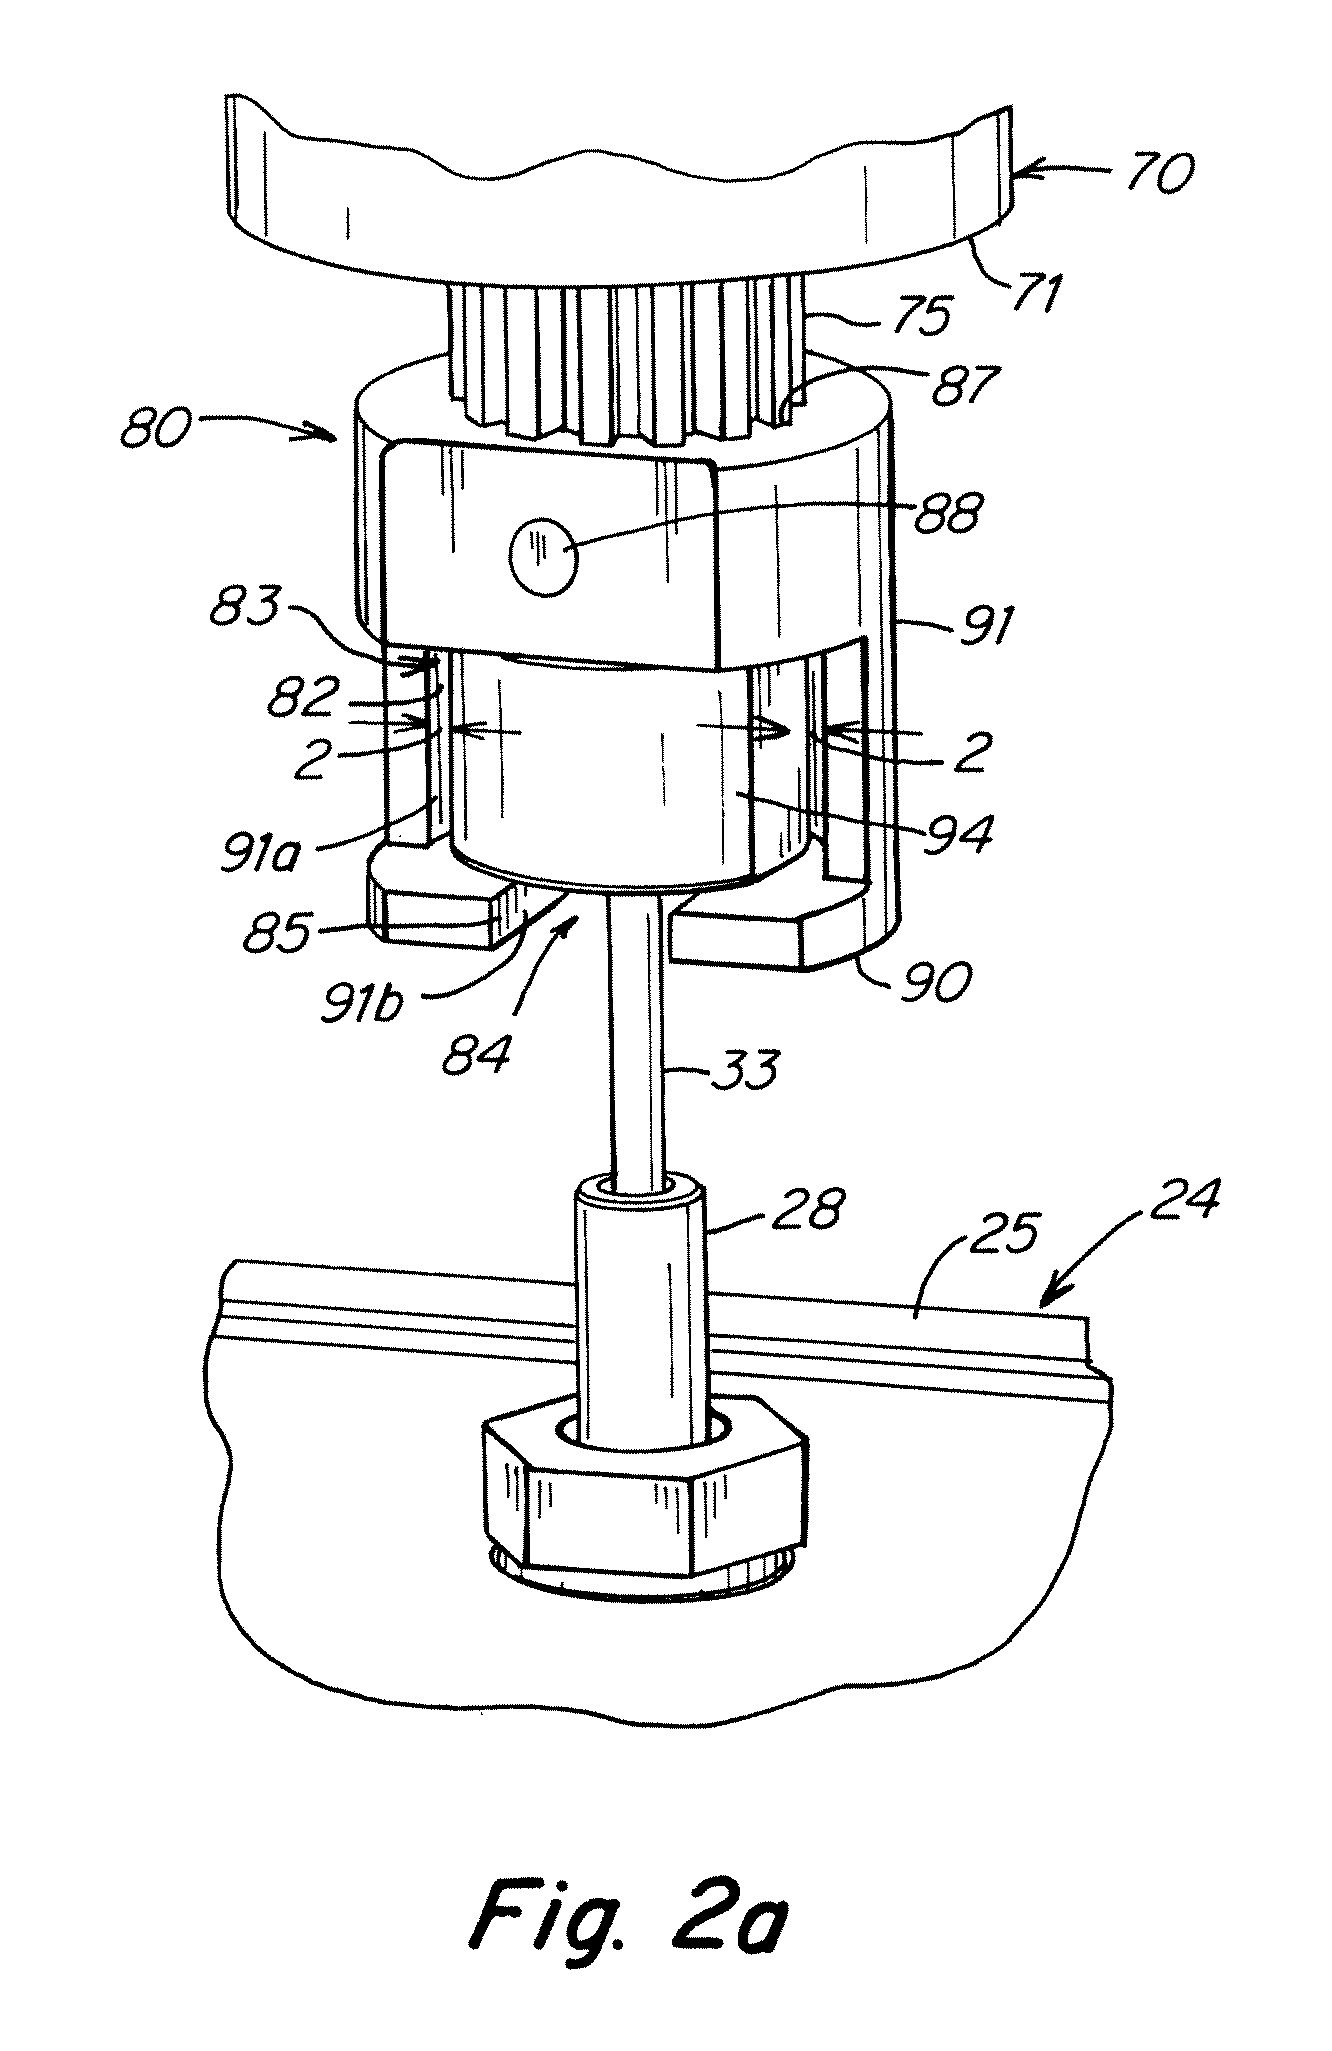 Method and apparatus for coupling and uncoupling an injection valve pin